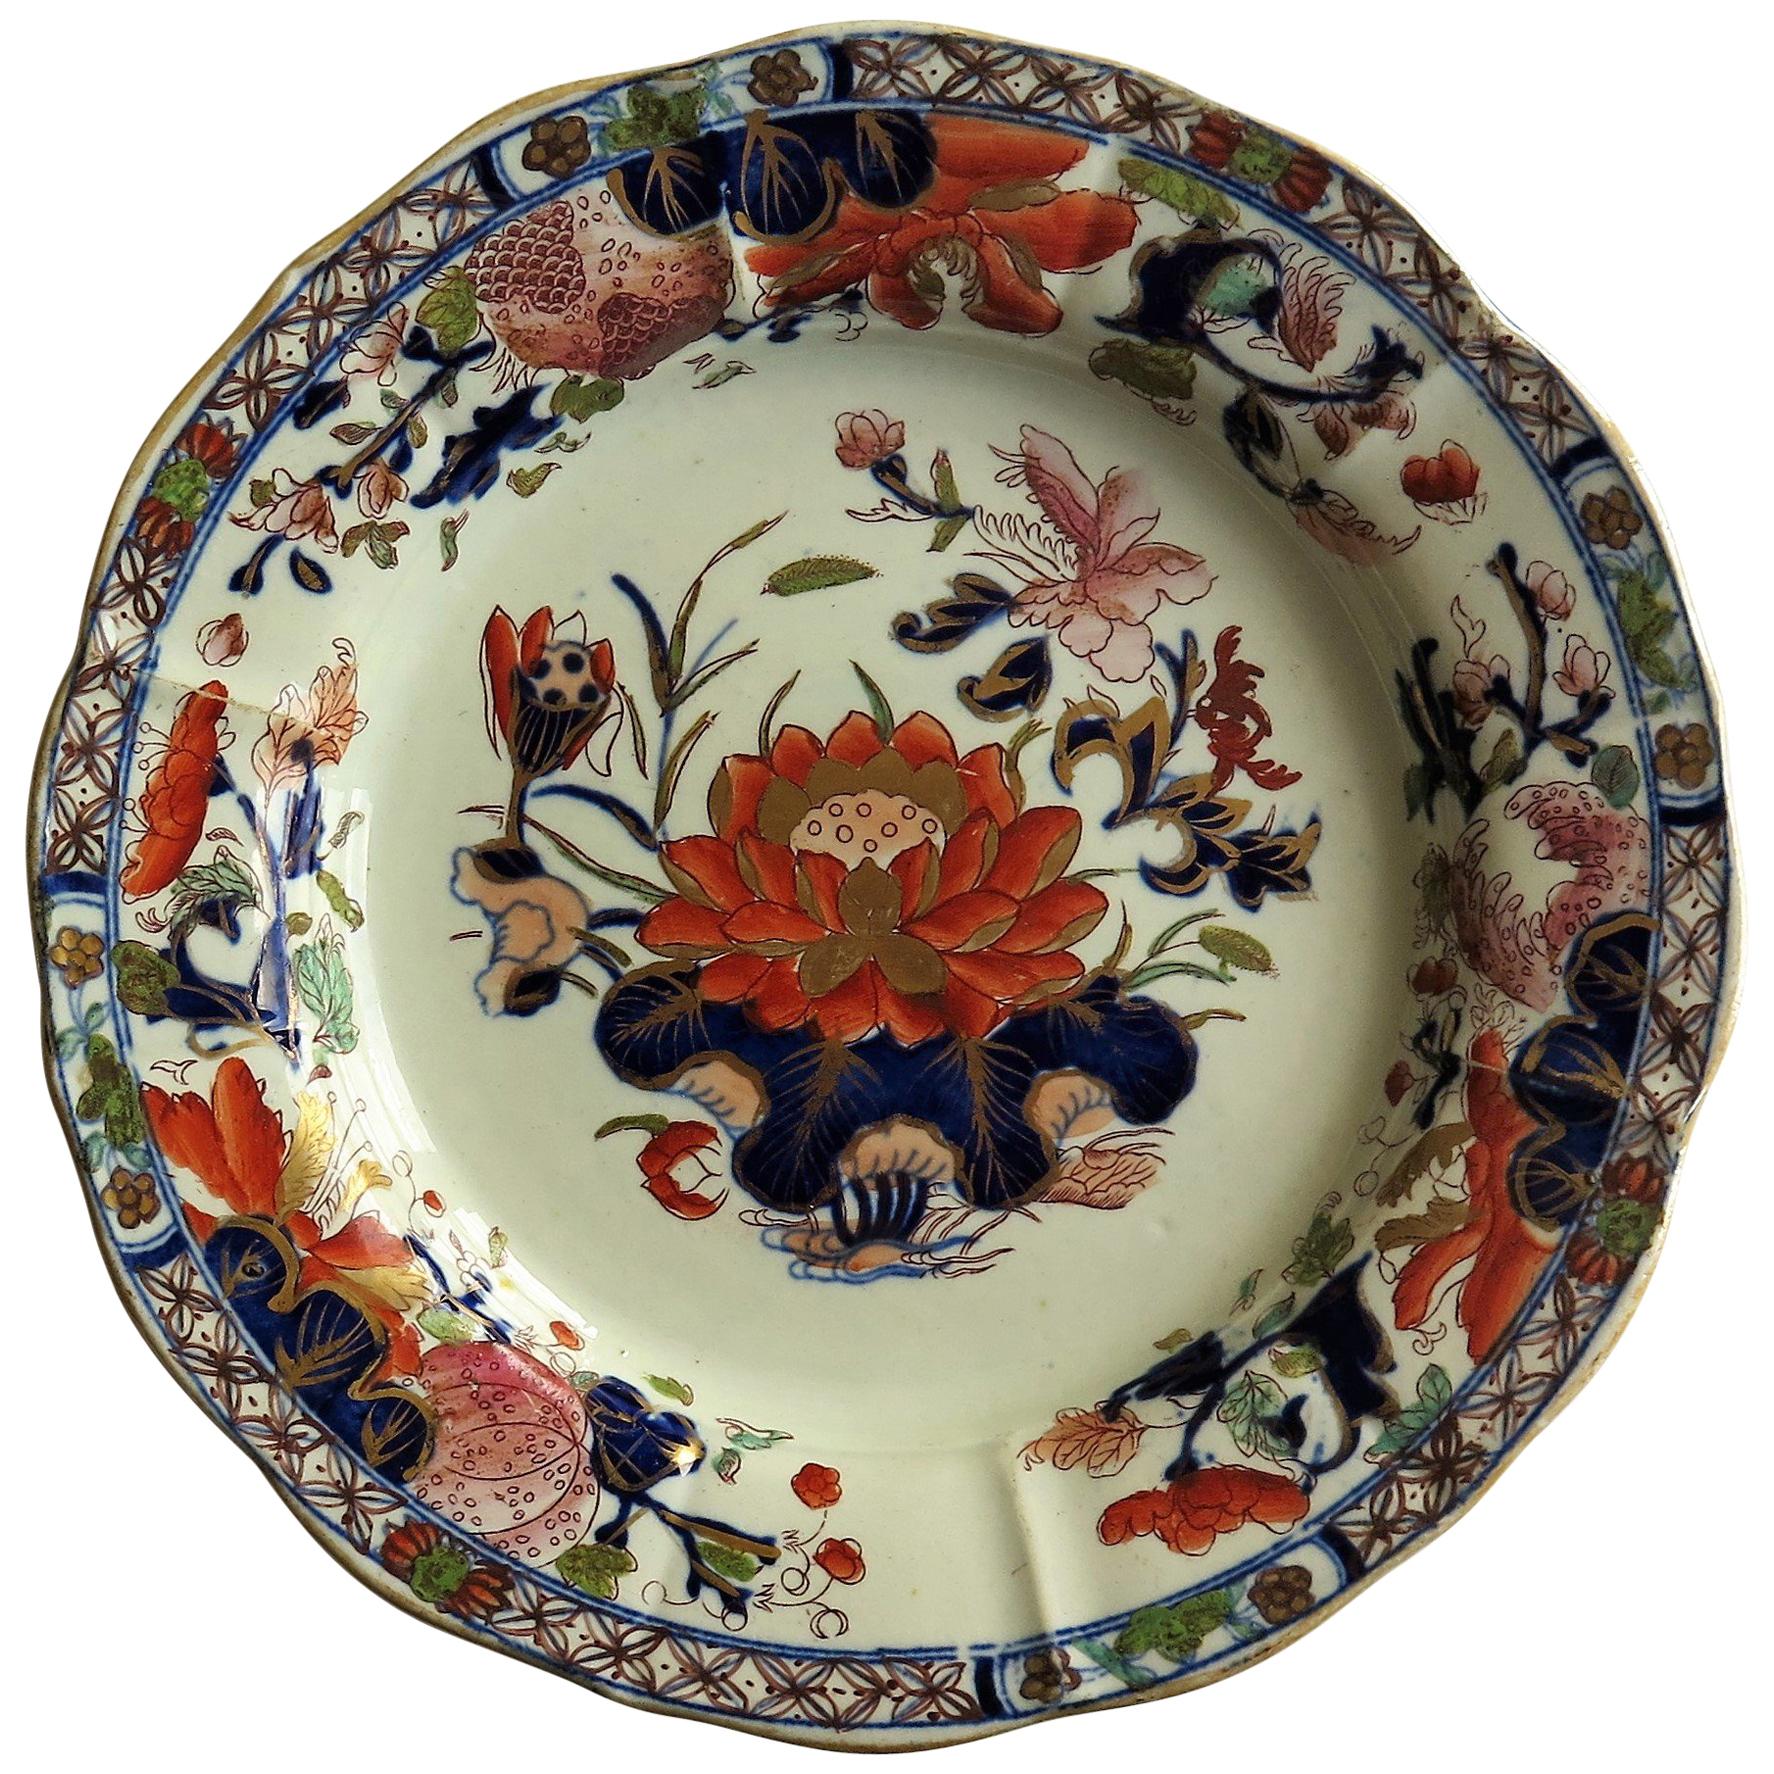 Mason's Ironstone Dish or Deep Plate Water Lily Pattern, Impressed Mark Ca. 1815